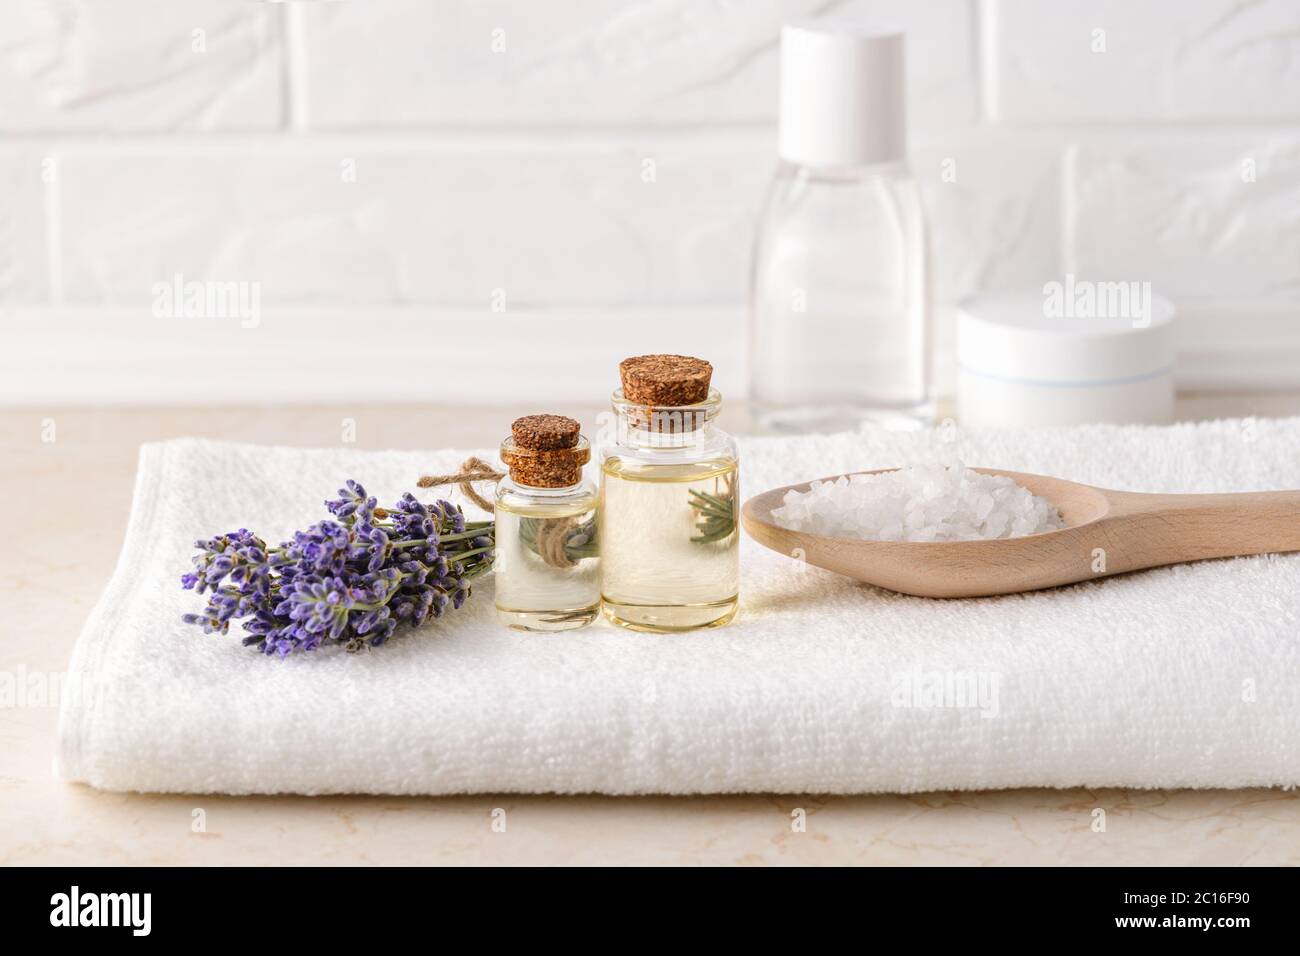 https://c8.alamy.com/comp/2C16F90/fresh-fragrant-lavender-lavender-essential-oil-and-cosmetic-bath-salt-on-a-white-terry-towel-in-a-bathroom-home-made-spa-skincare-and-cosmetology-2C16F90.jpg